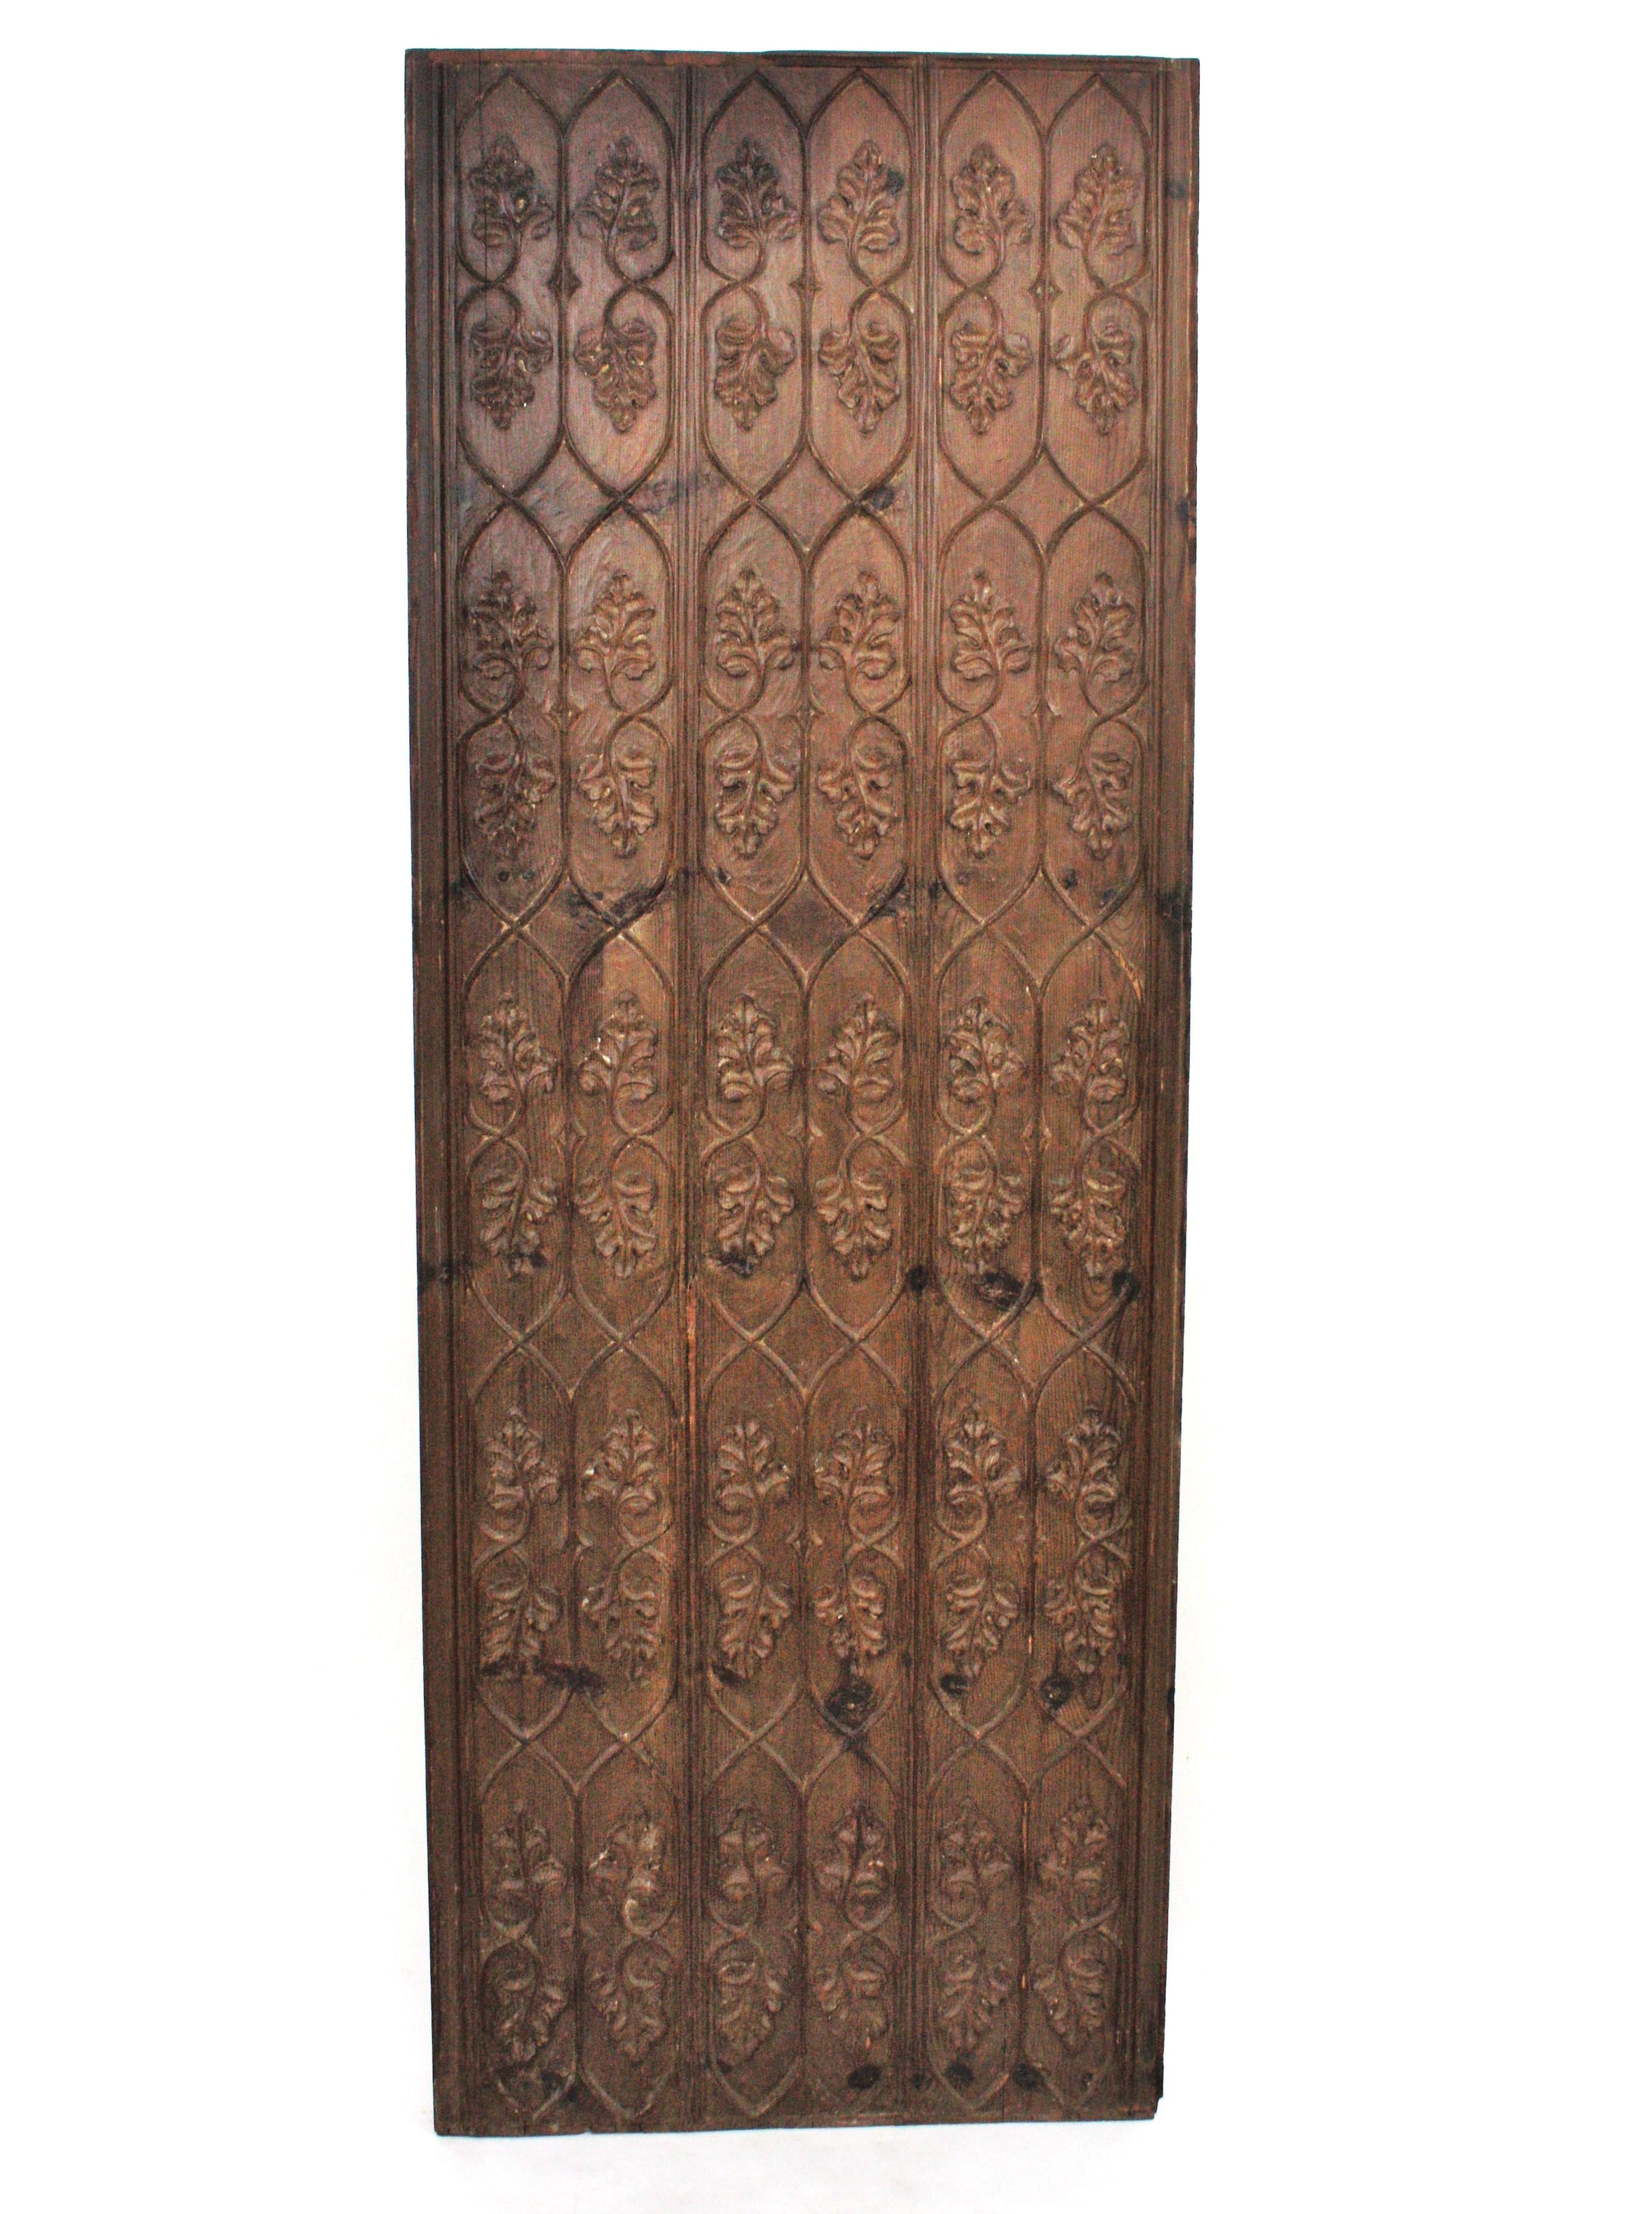 Neoclassical Revival Spanish Hand-Carved Walnut Wood Decorative Wall Panel with Foliage Motifs For Sale